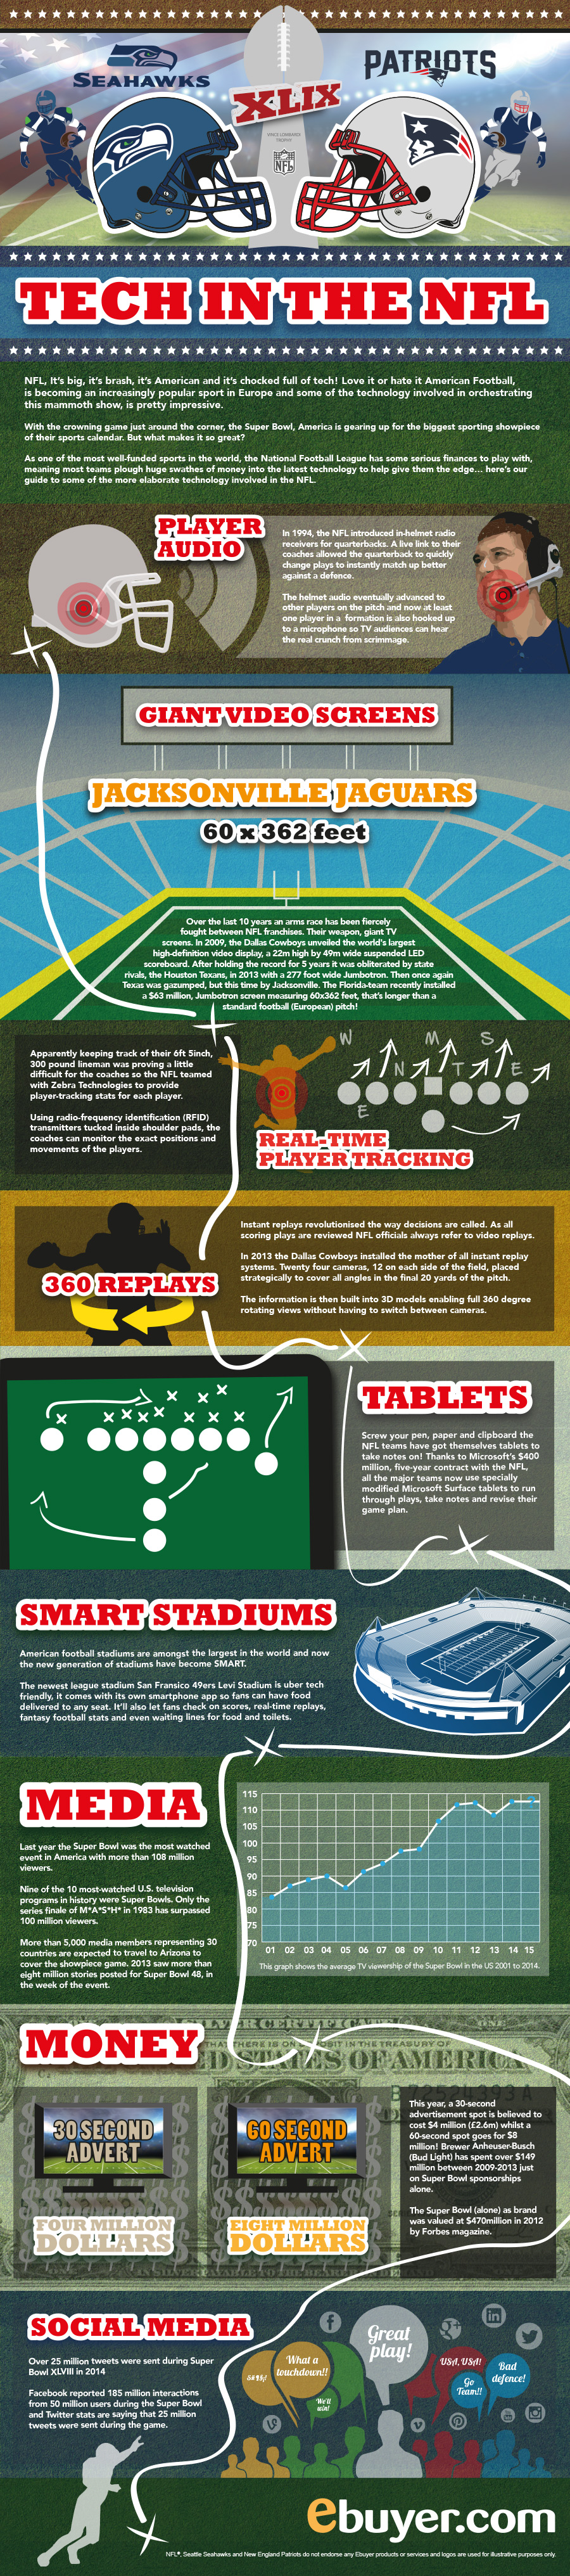 NFL-tech-infographic